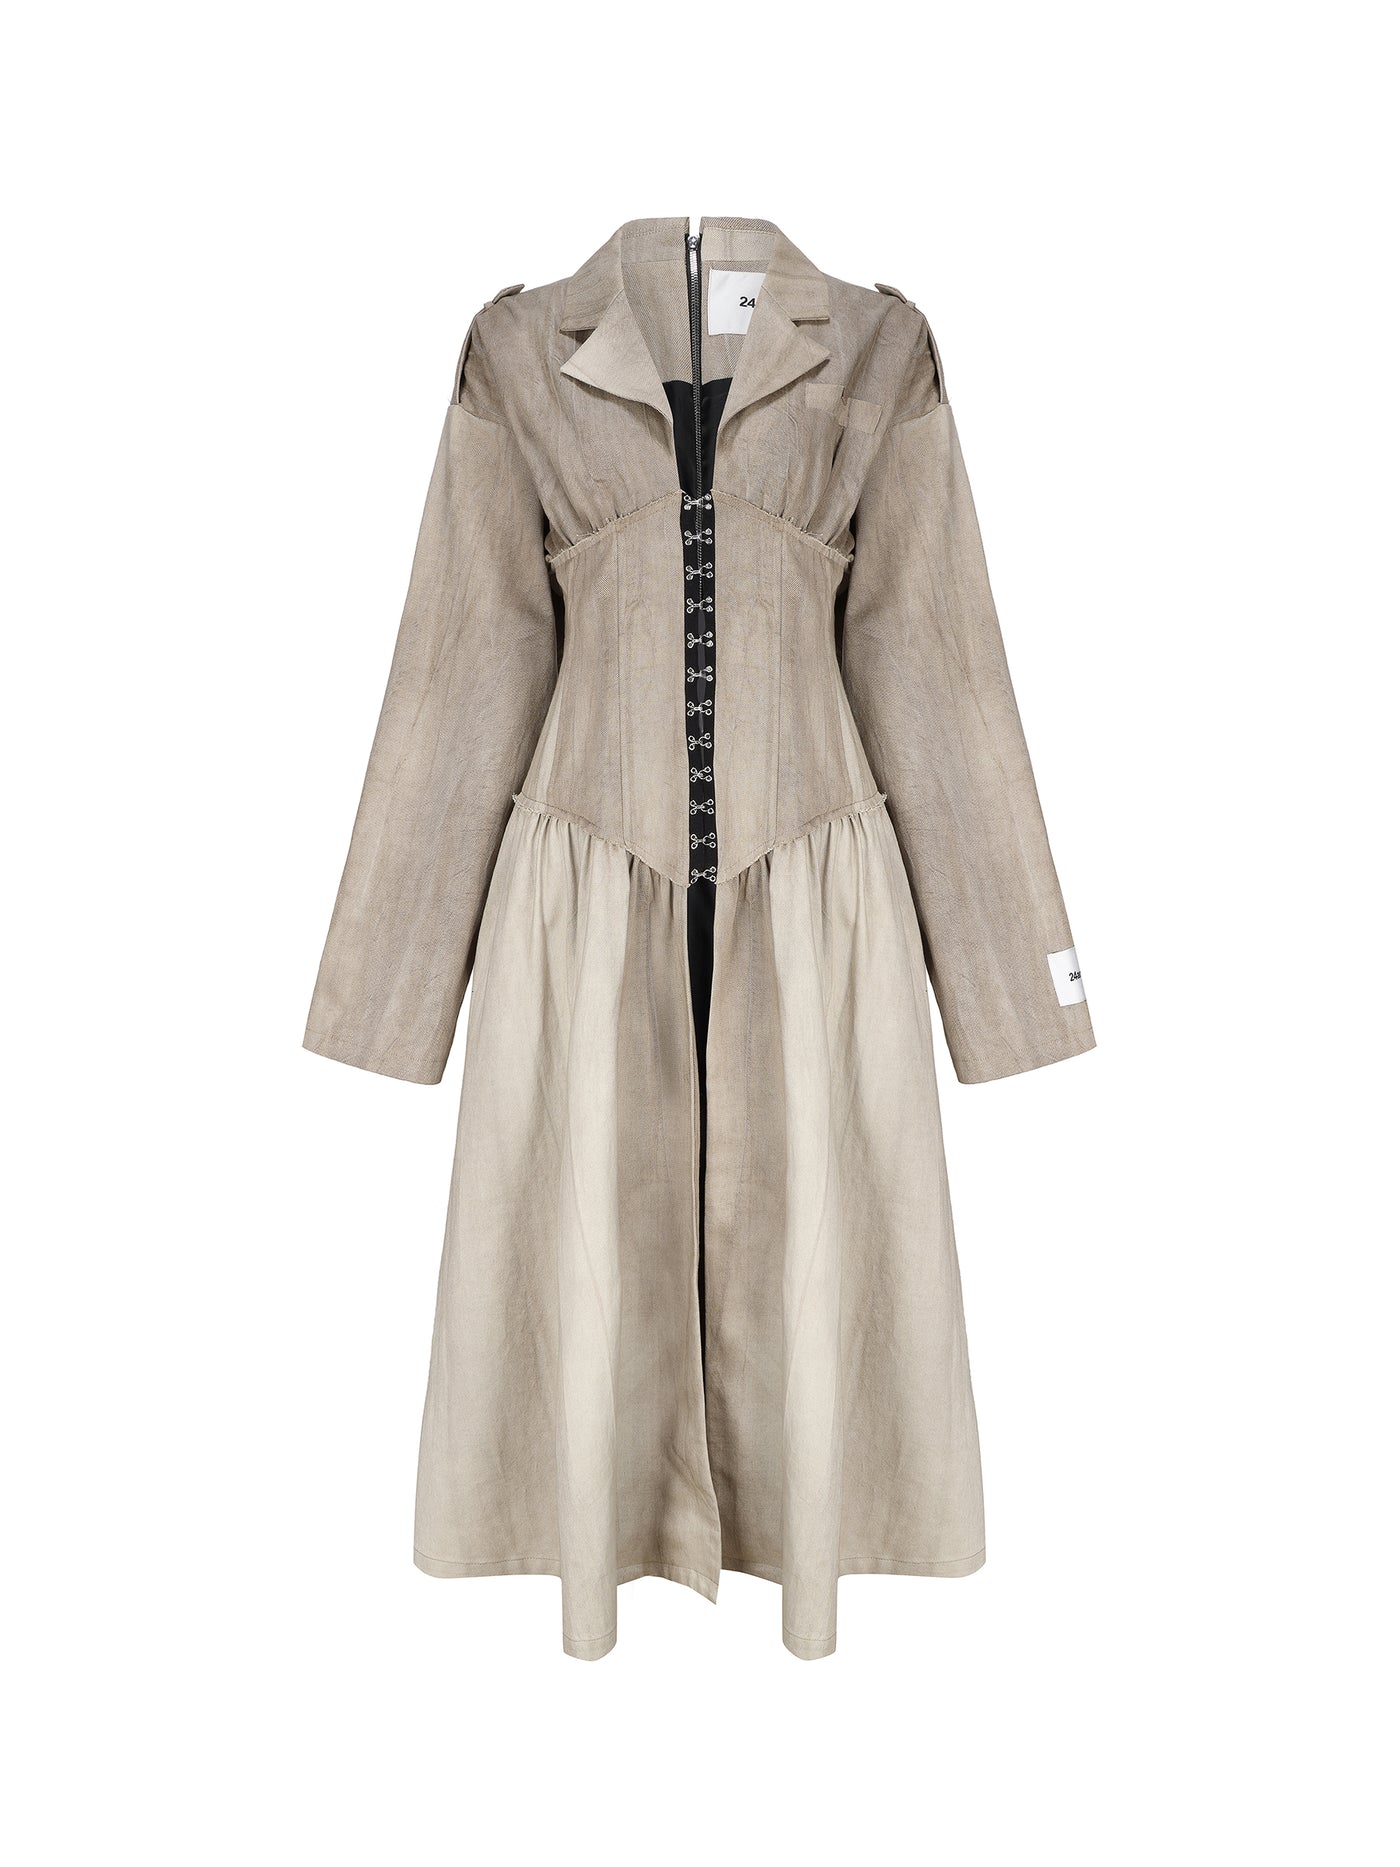 Back Zip A-Line One-Piece Style Trench Coat ANS0046